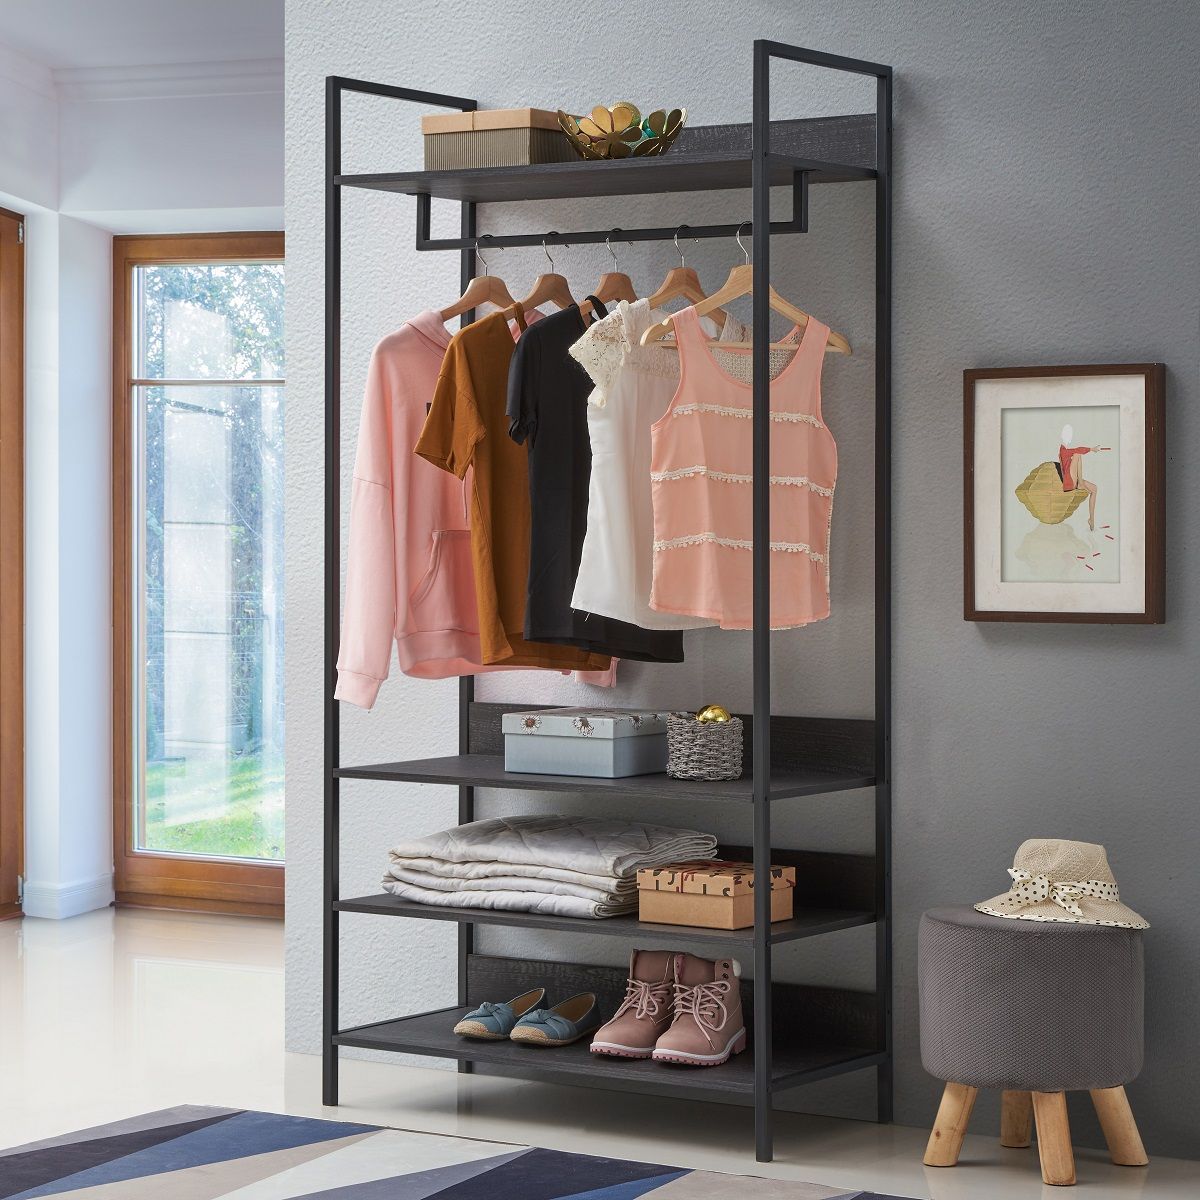 Open Wardrobe With 4 Shelves Intended For 4 Shelf Closet Wardrobes (View 3 of 15)